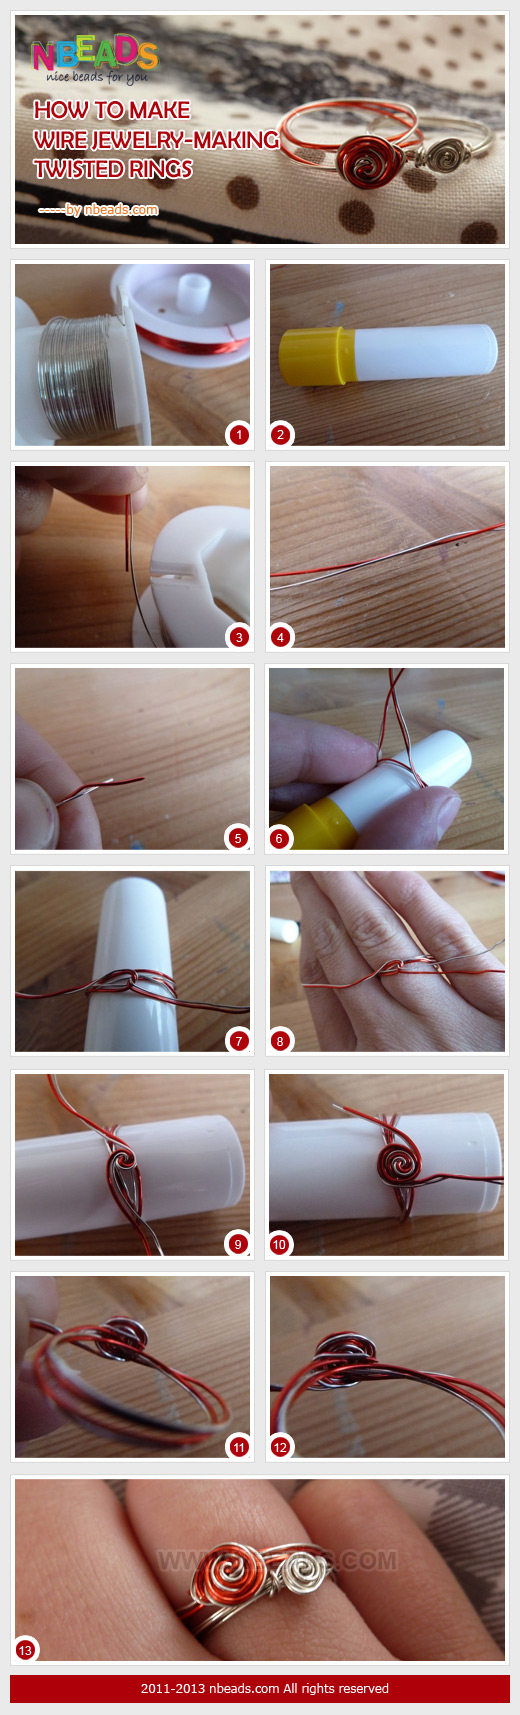 how to make wire jewelry-making twisted rings